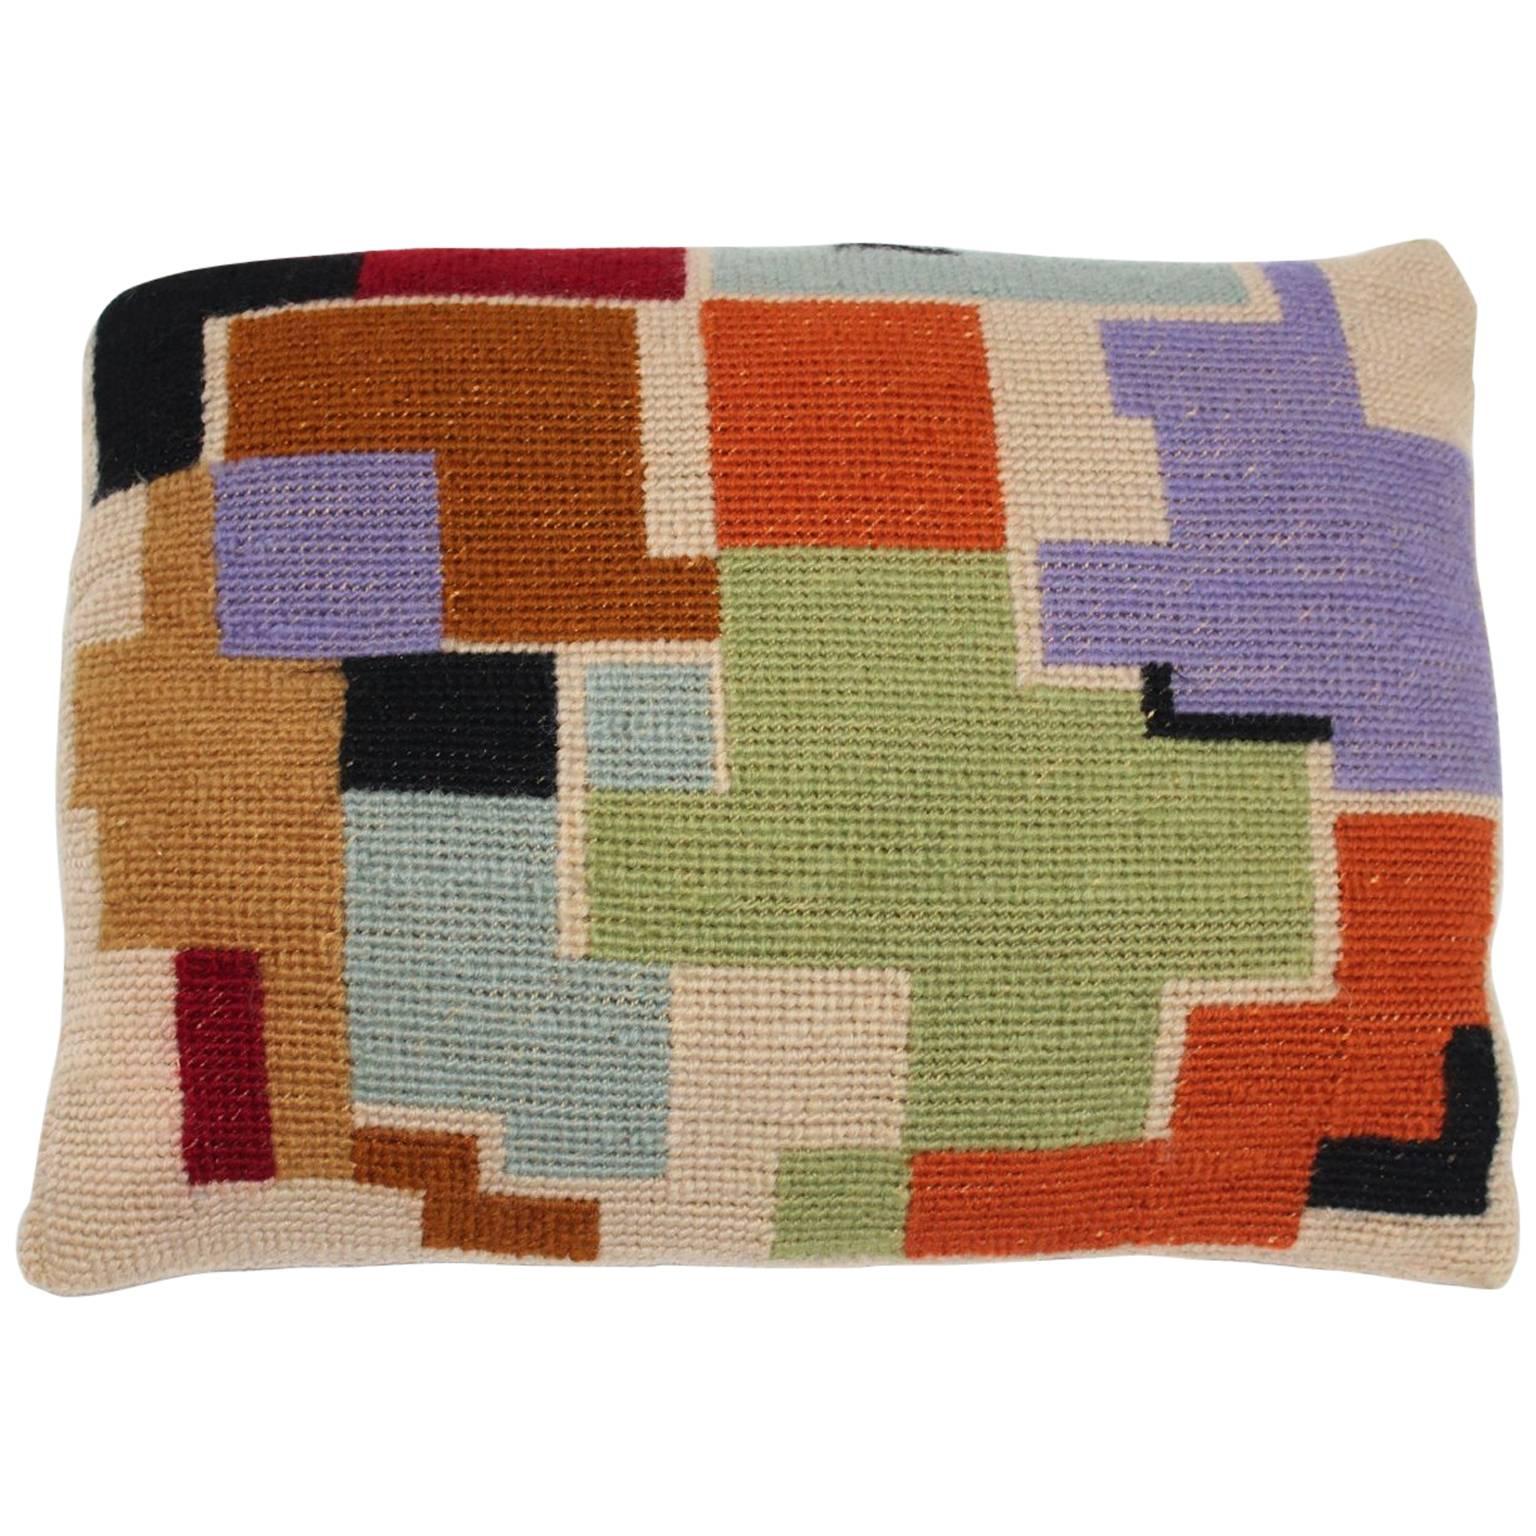 Bauhaus Style Hand Embroidery Wool Pillow with Geometric Design, 1920s For Sale